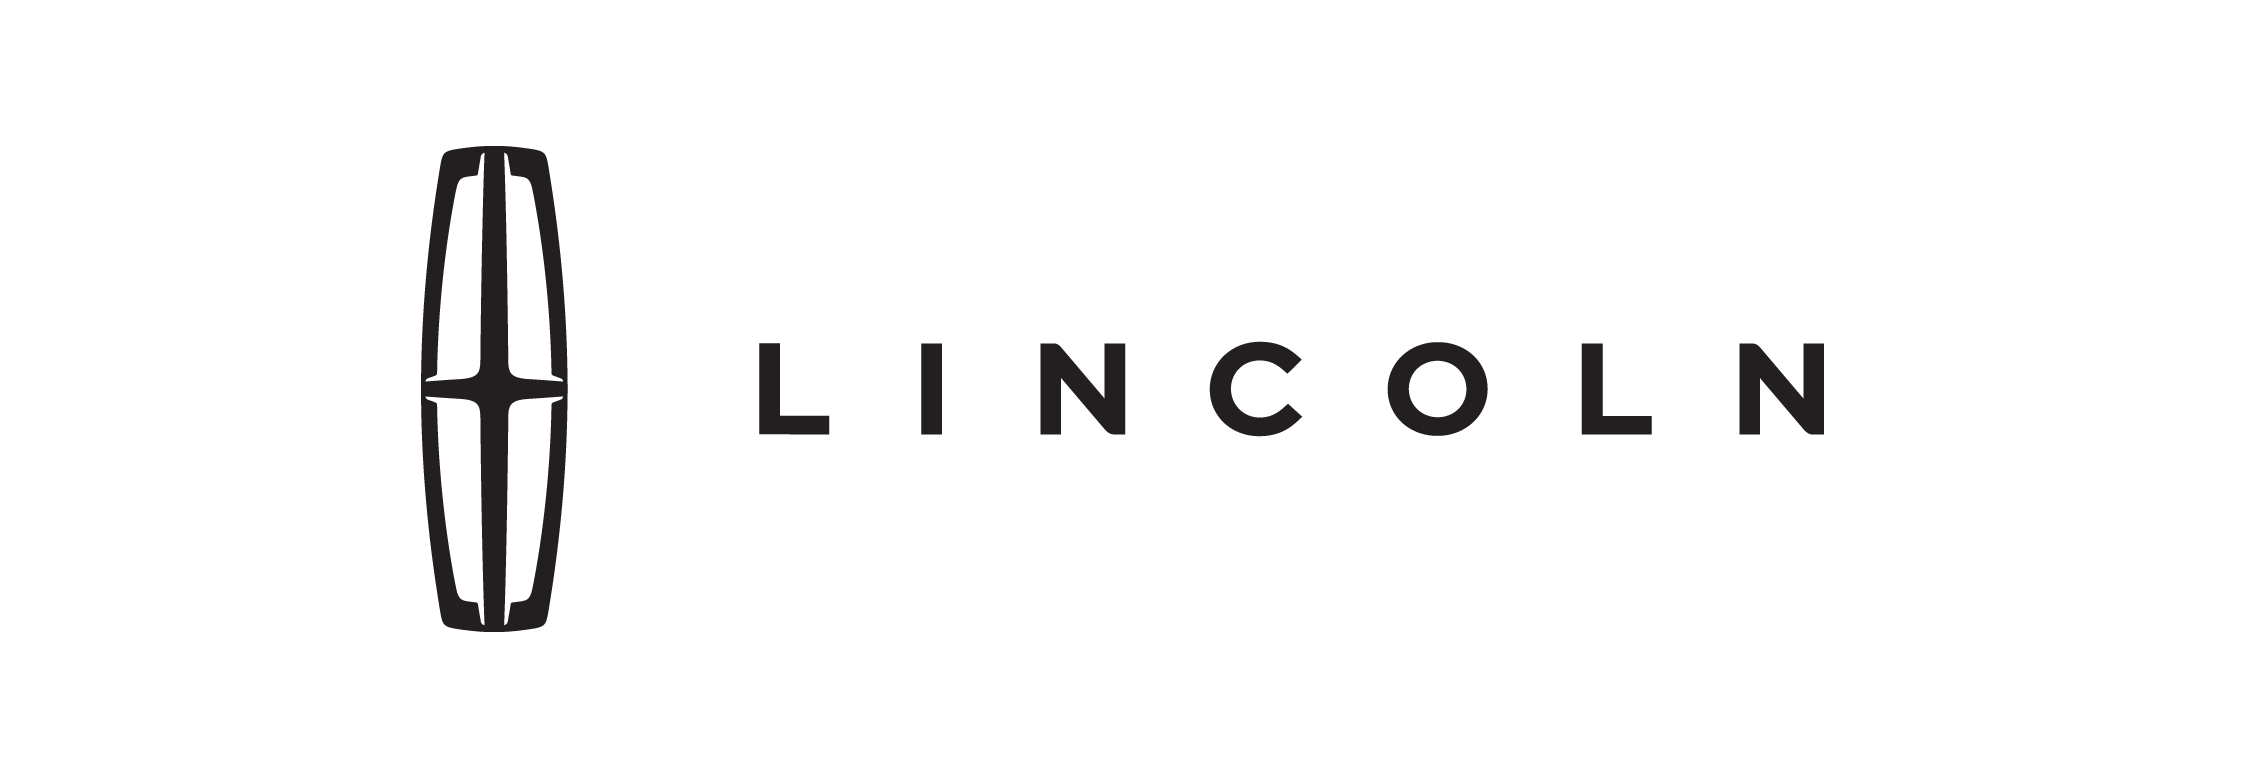 Lincolm Logo - Lincoln Trial Offer from SiriusXM Satellite Radio